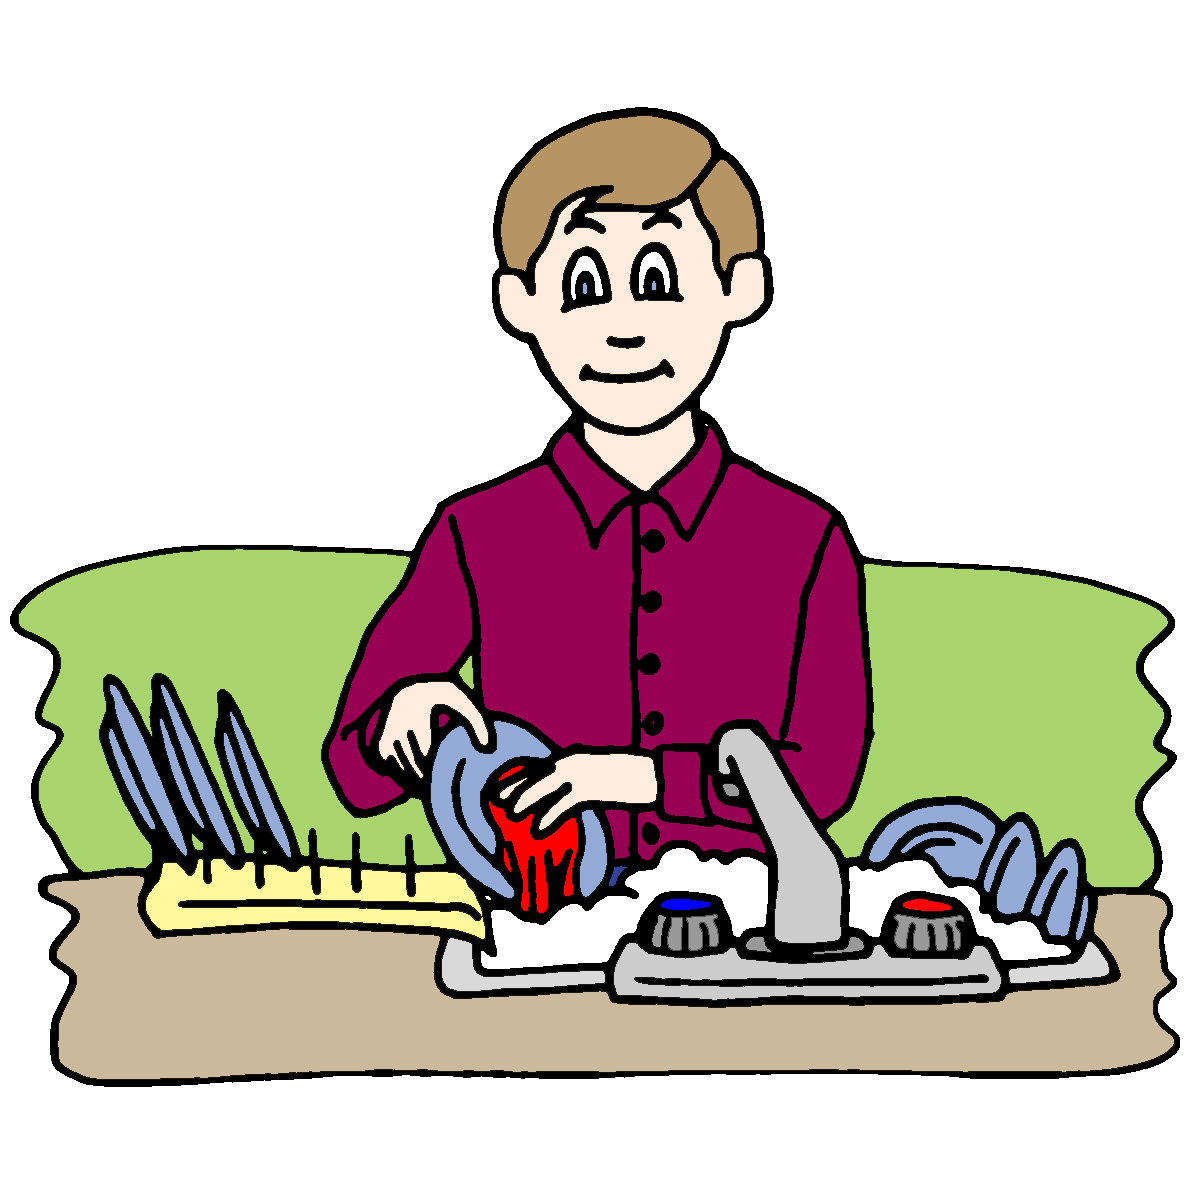 Housework Clipart | Clipart Panda - Free Clipart Images